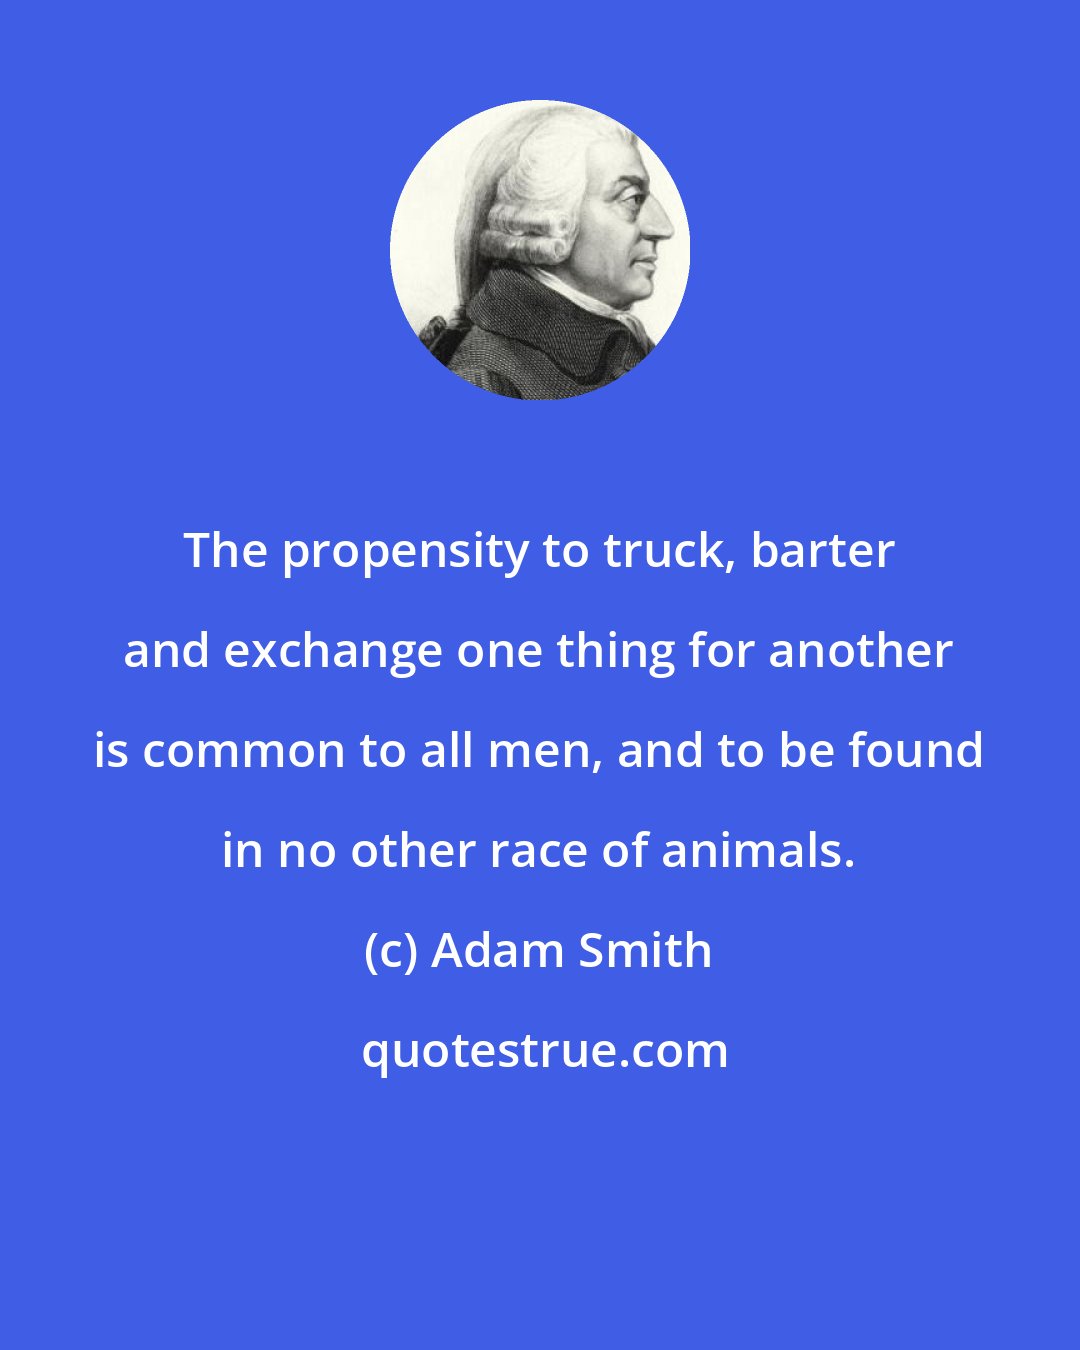 Adam Smith: The propensity to truck, barter and exchange one thing for another is common to all men, and to be found in no other race of animals.